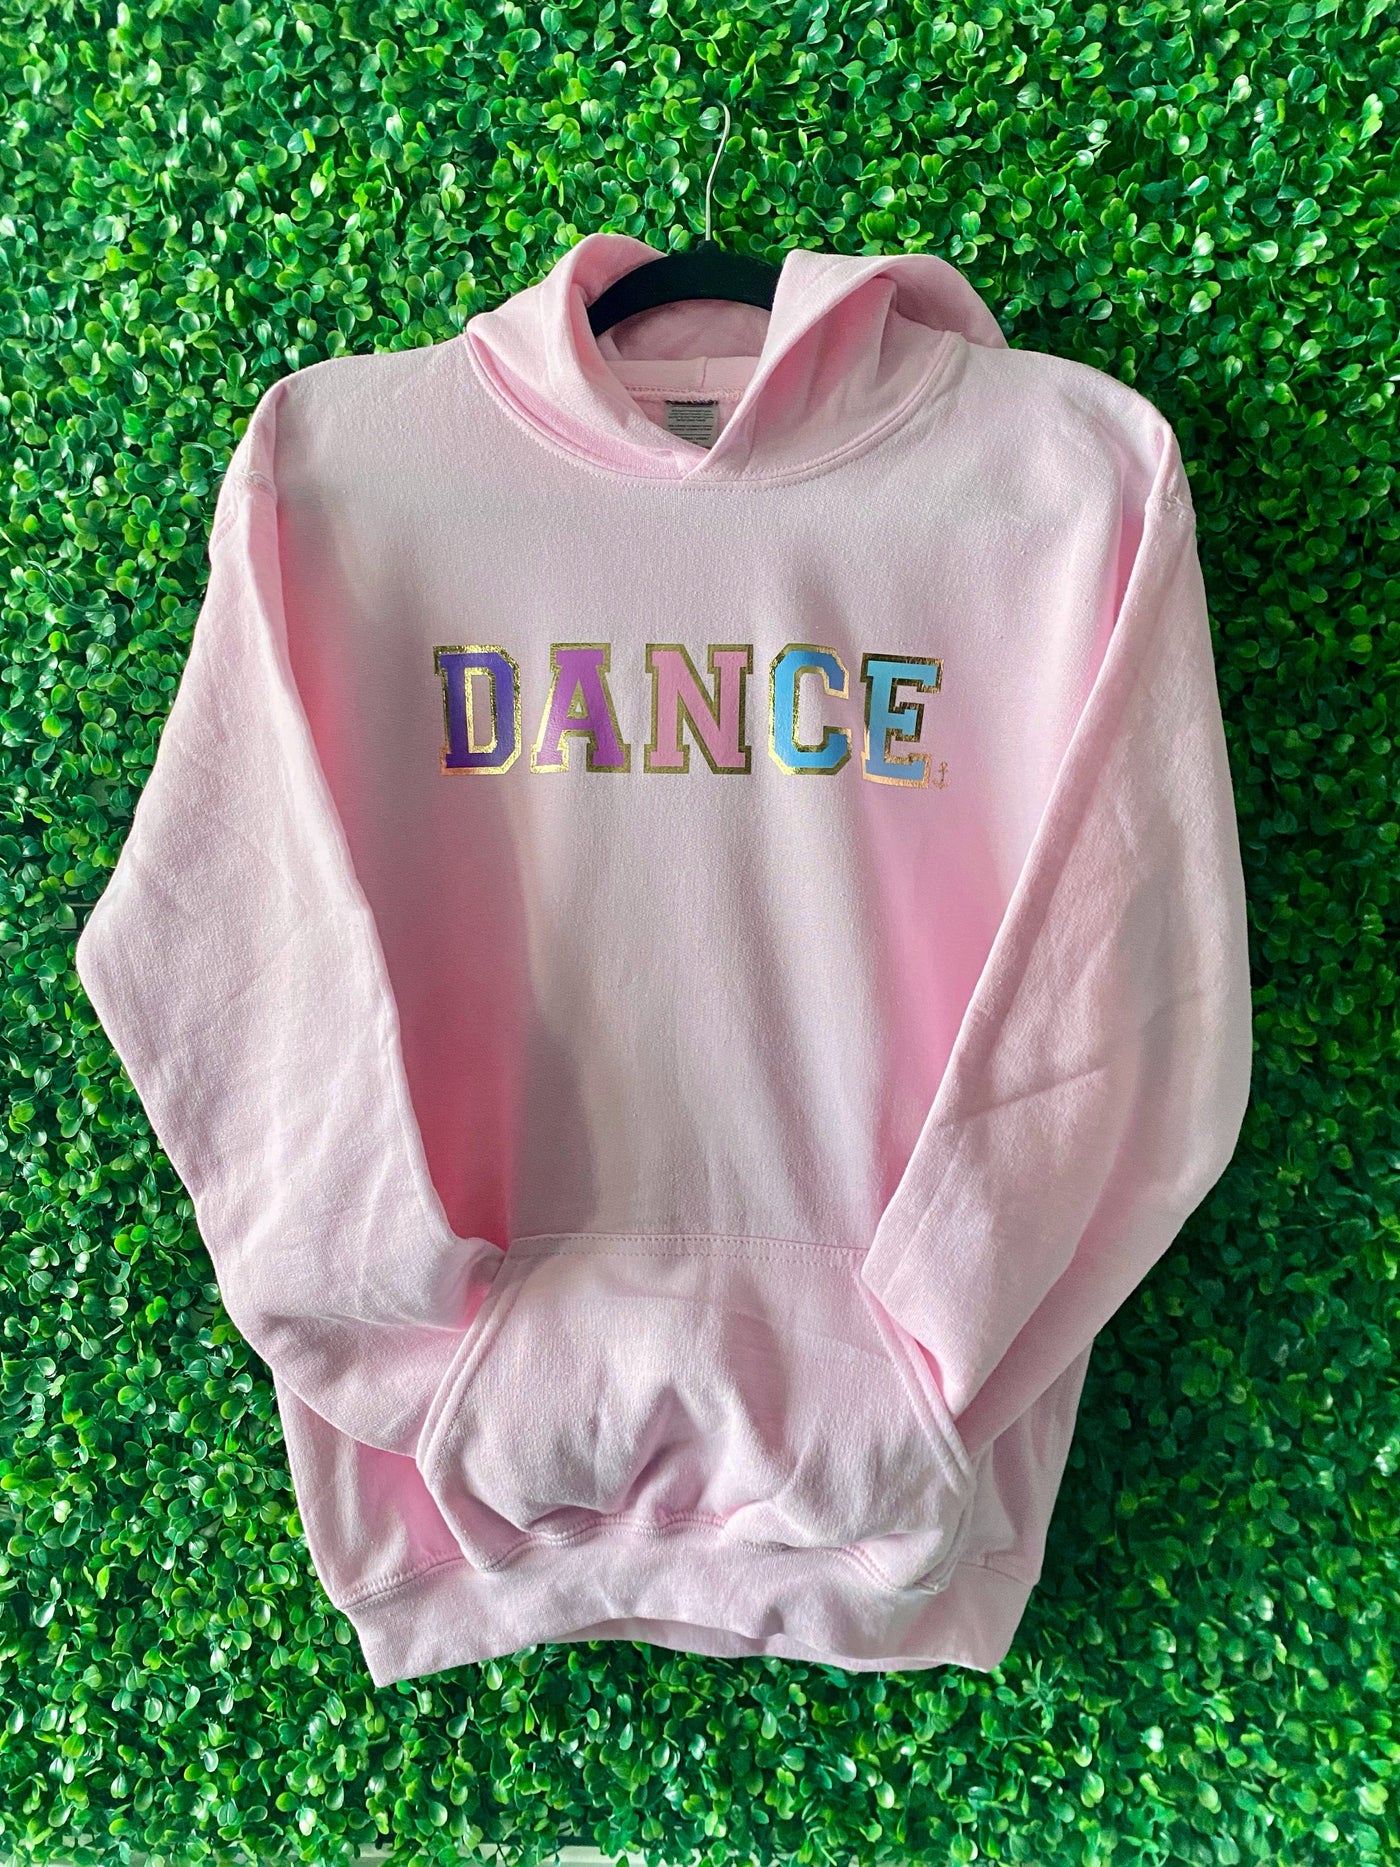 Imperfectly Perfect "Dance" Varsity Youth Hoodie - XL Youth - Light Pink